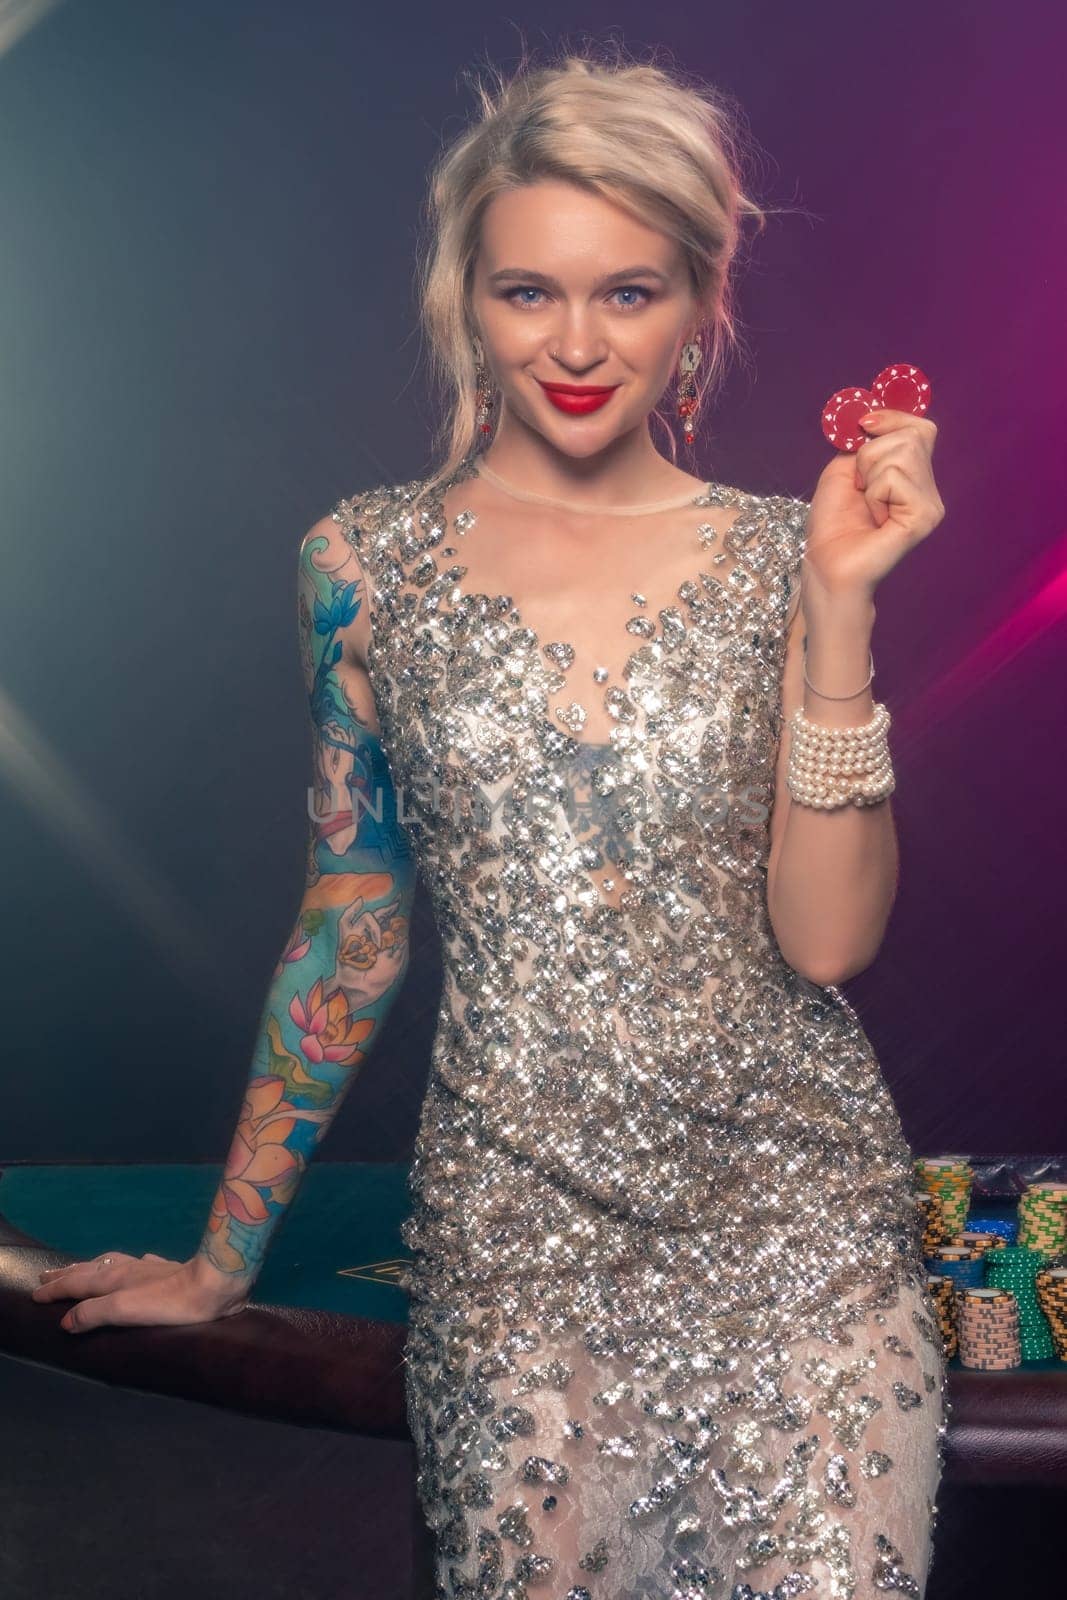 Blonde woman with a beautiful hairstyle and perfect make-up is posing with red gambling chips in her hands. Casino, poker. by nazarovsergey